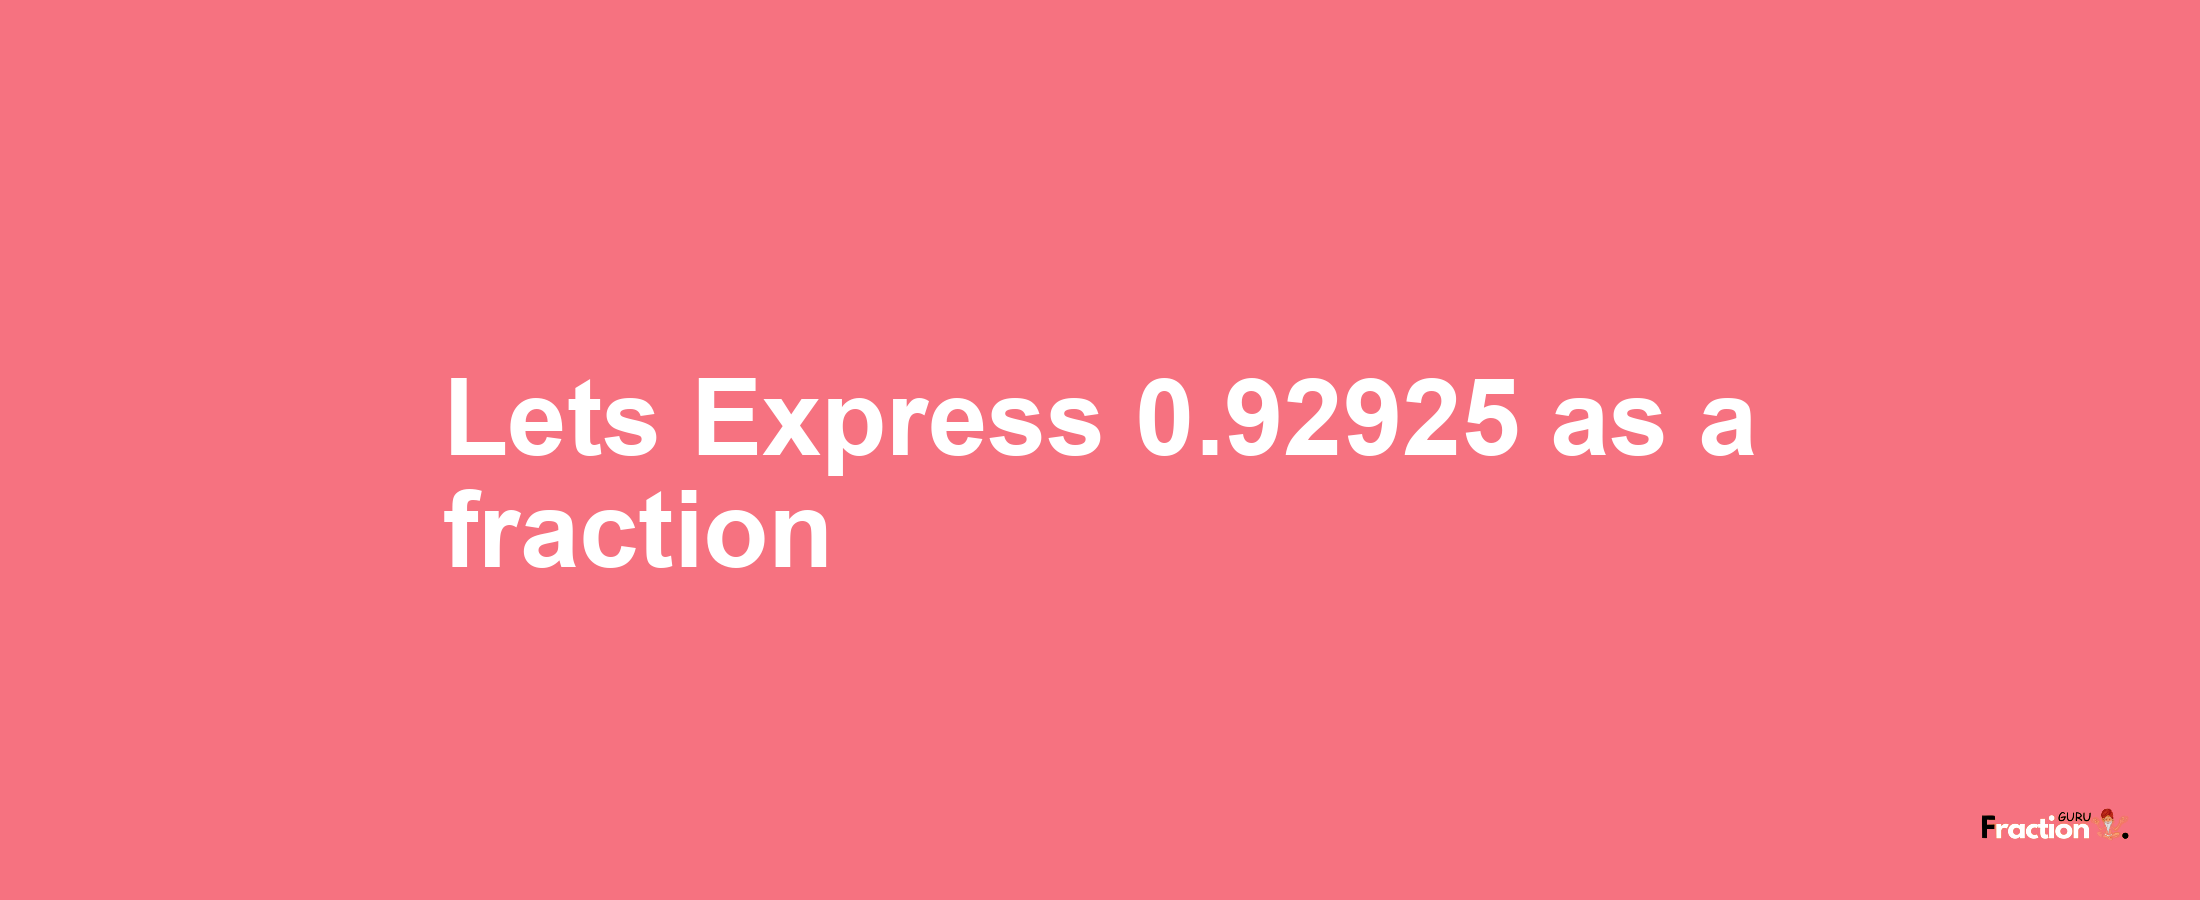 Lets Express 0.92925 as afraction